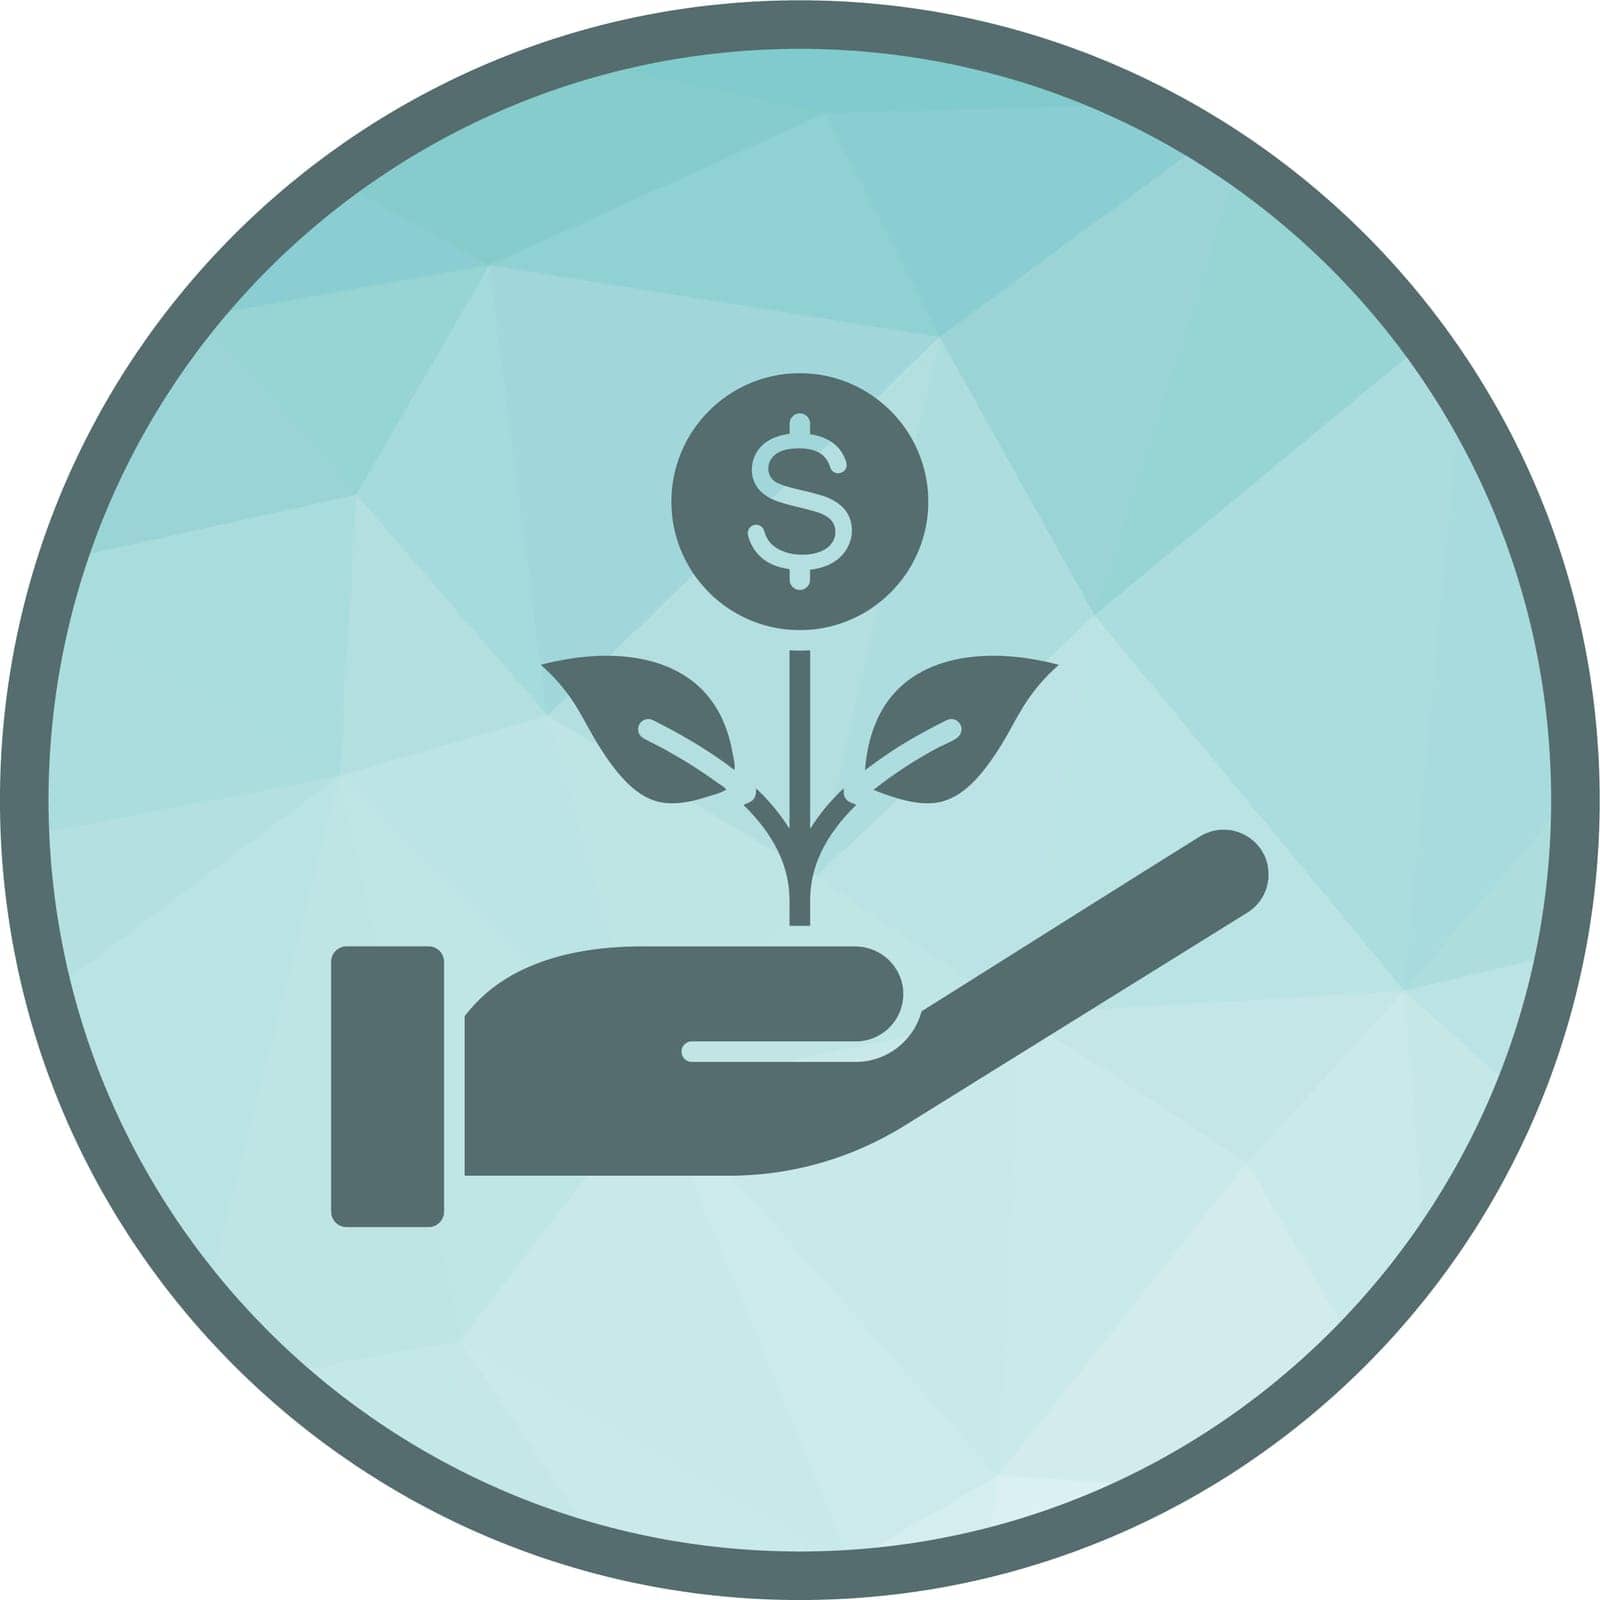 Investment icon vector image. Suitable for mobile application web application and print media.